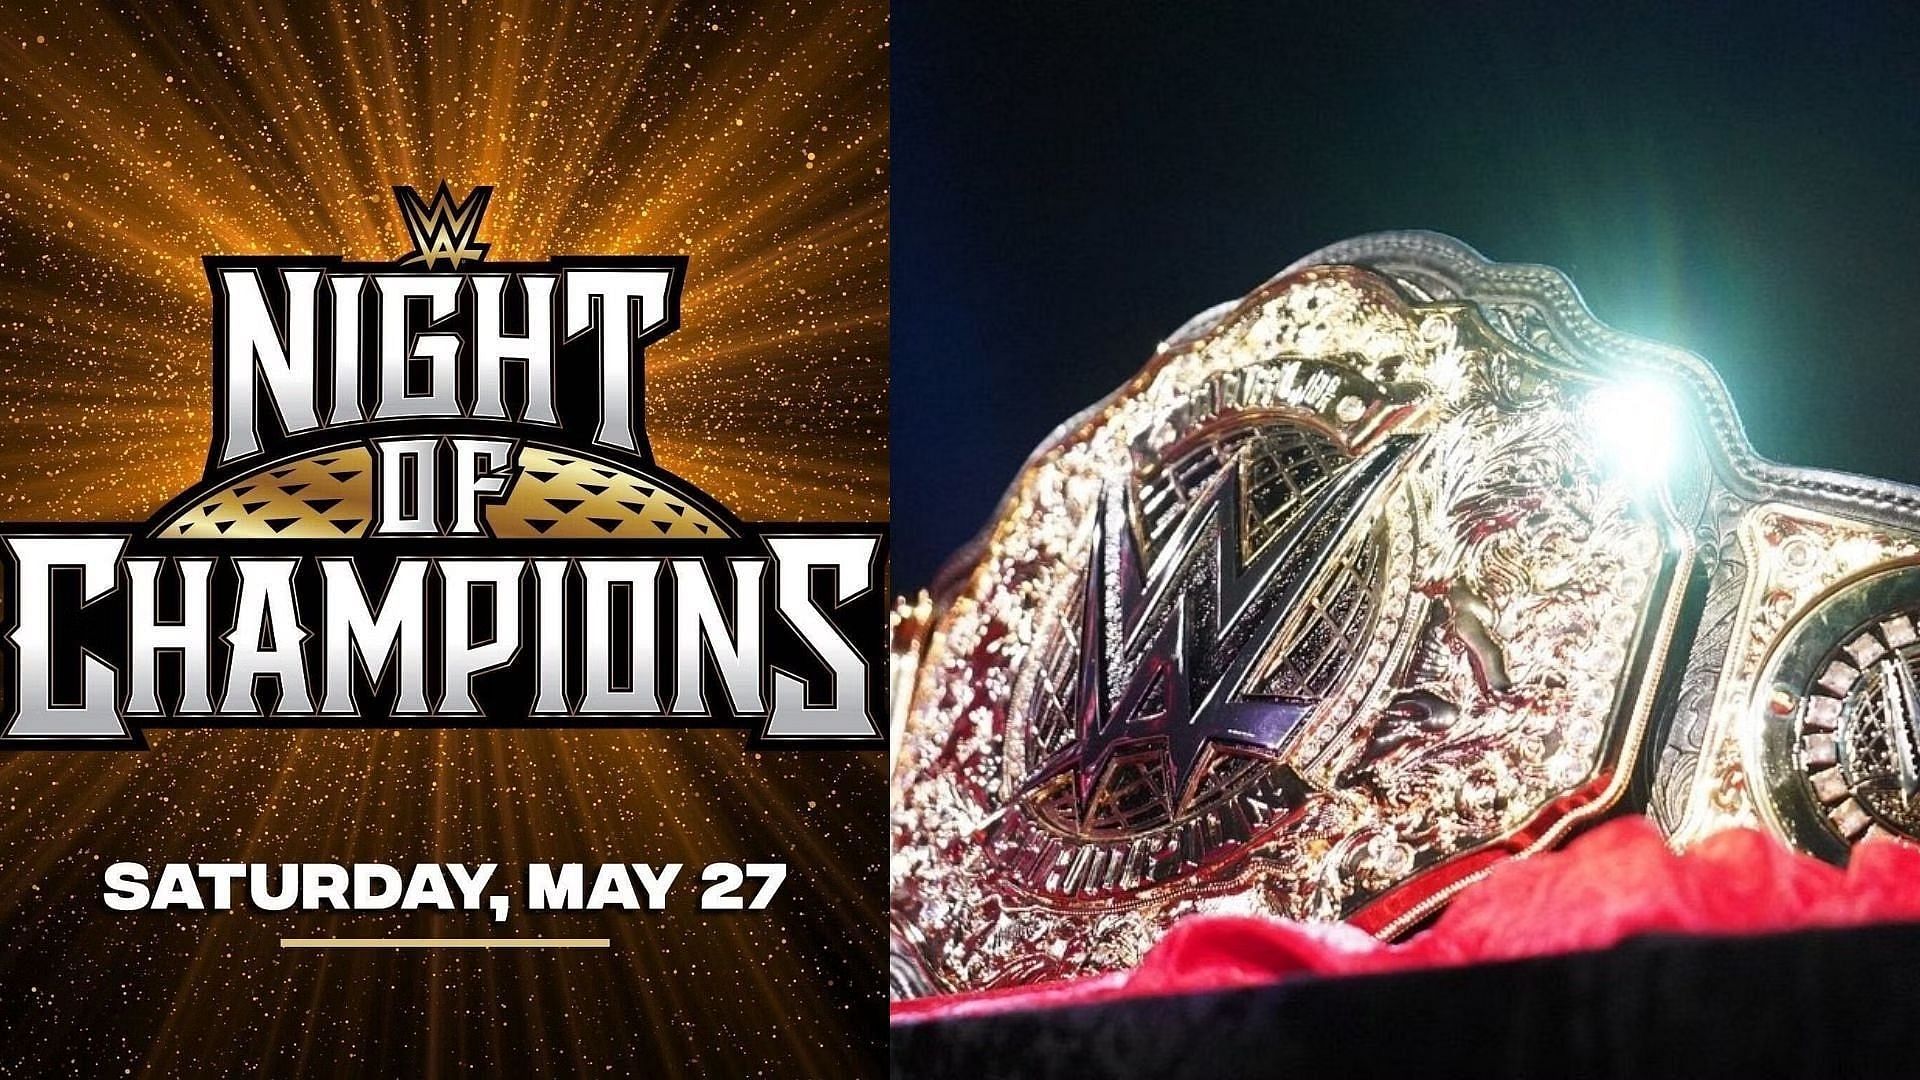 Night of Champions will take place on Saturday May 27th.